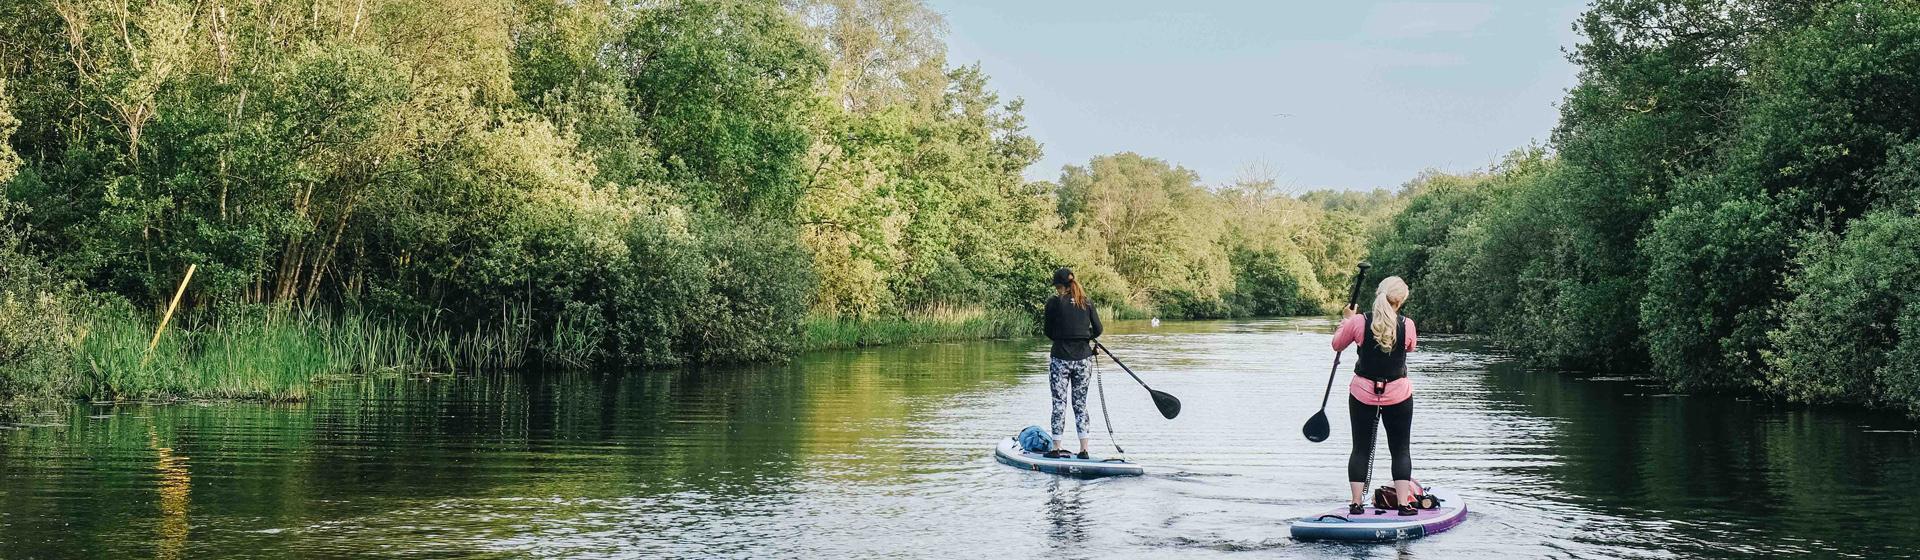 Paddleboarders exploring the Broads